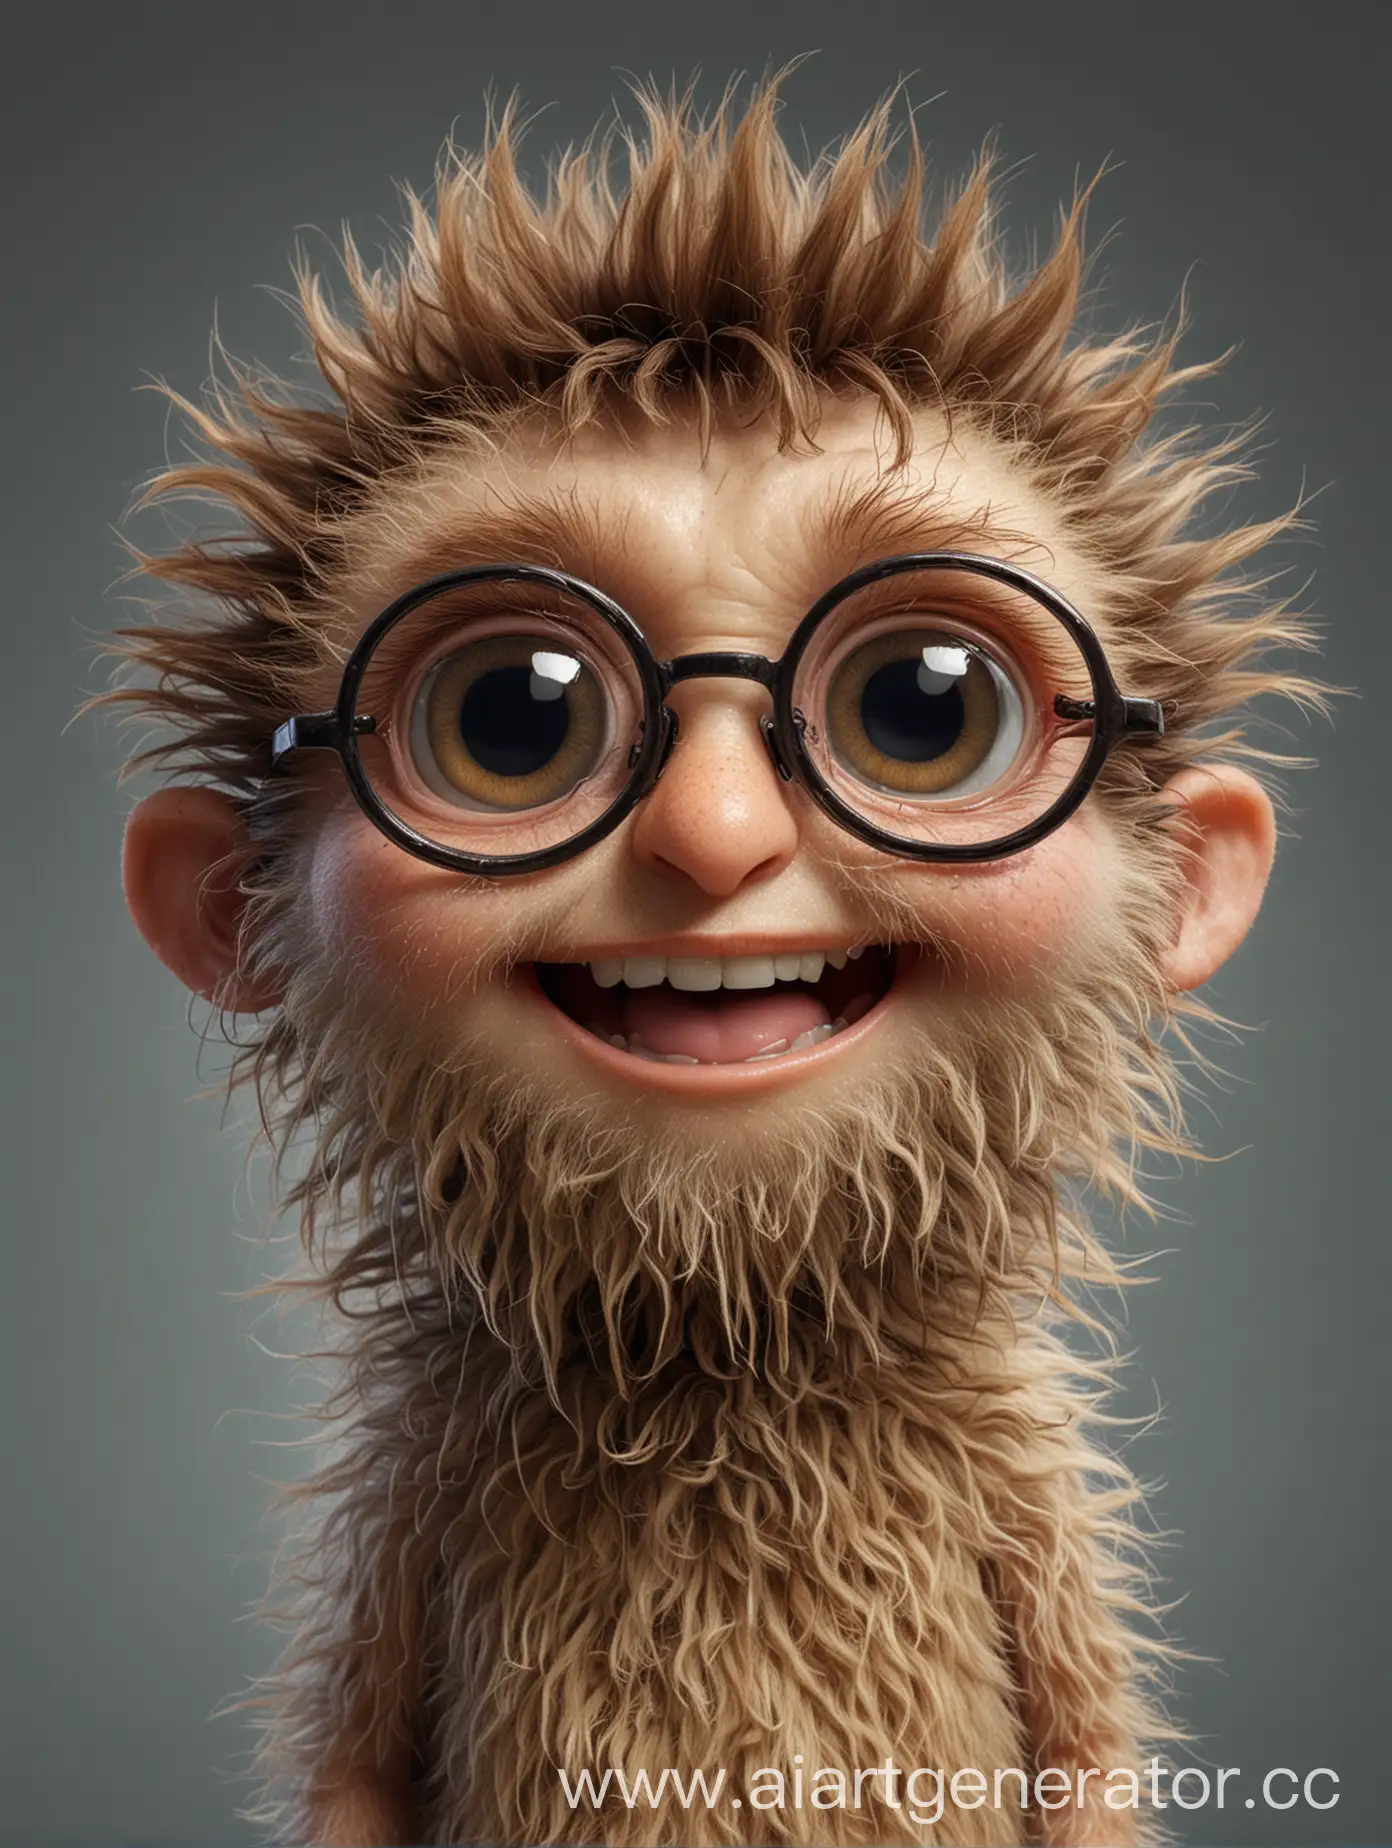 Hyperrealistic smallish, hairy head, with big eyes with small pumped-up hands, smiling with glasses